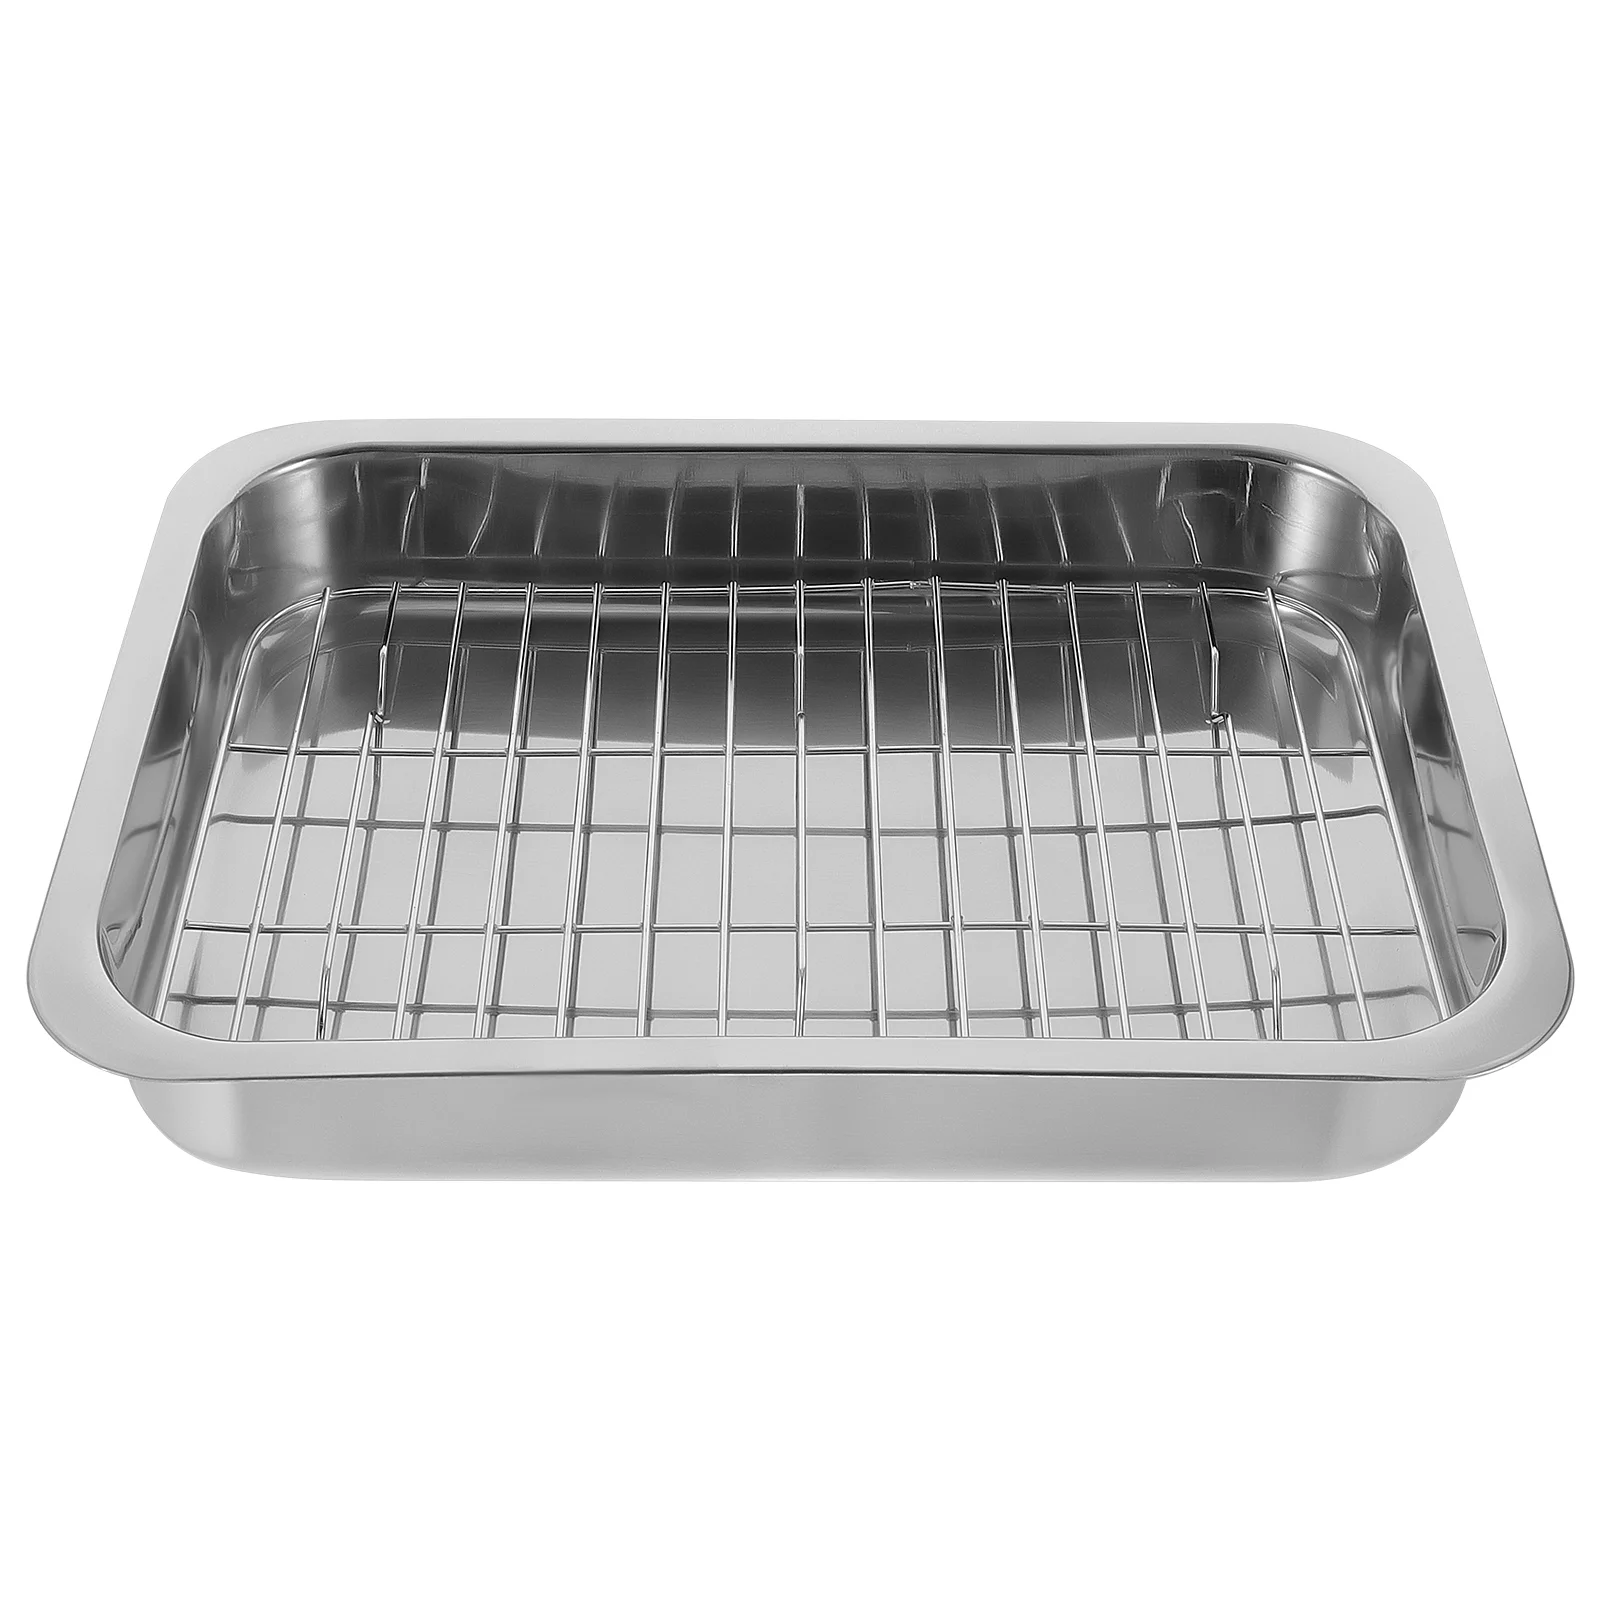 

Pizzelle Cookies Stainless Steel Bakeware Tray Oven Pan Baking Kit Rack Pizza